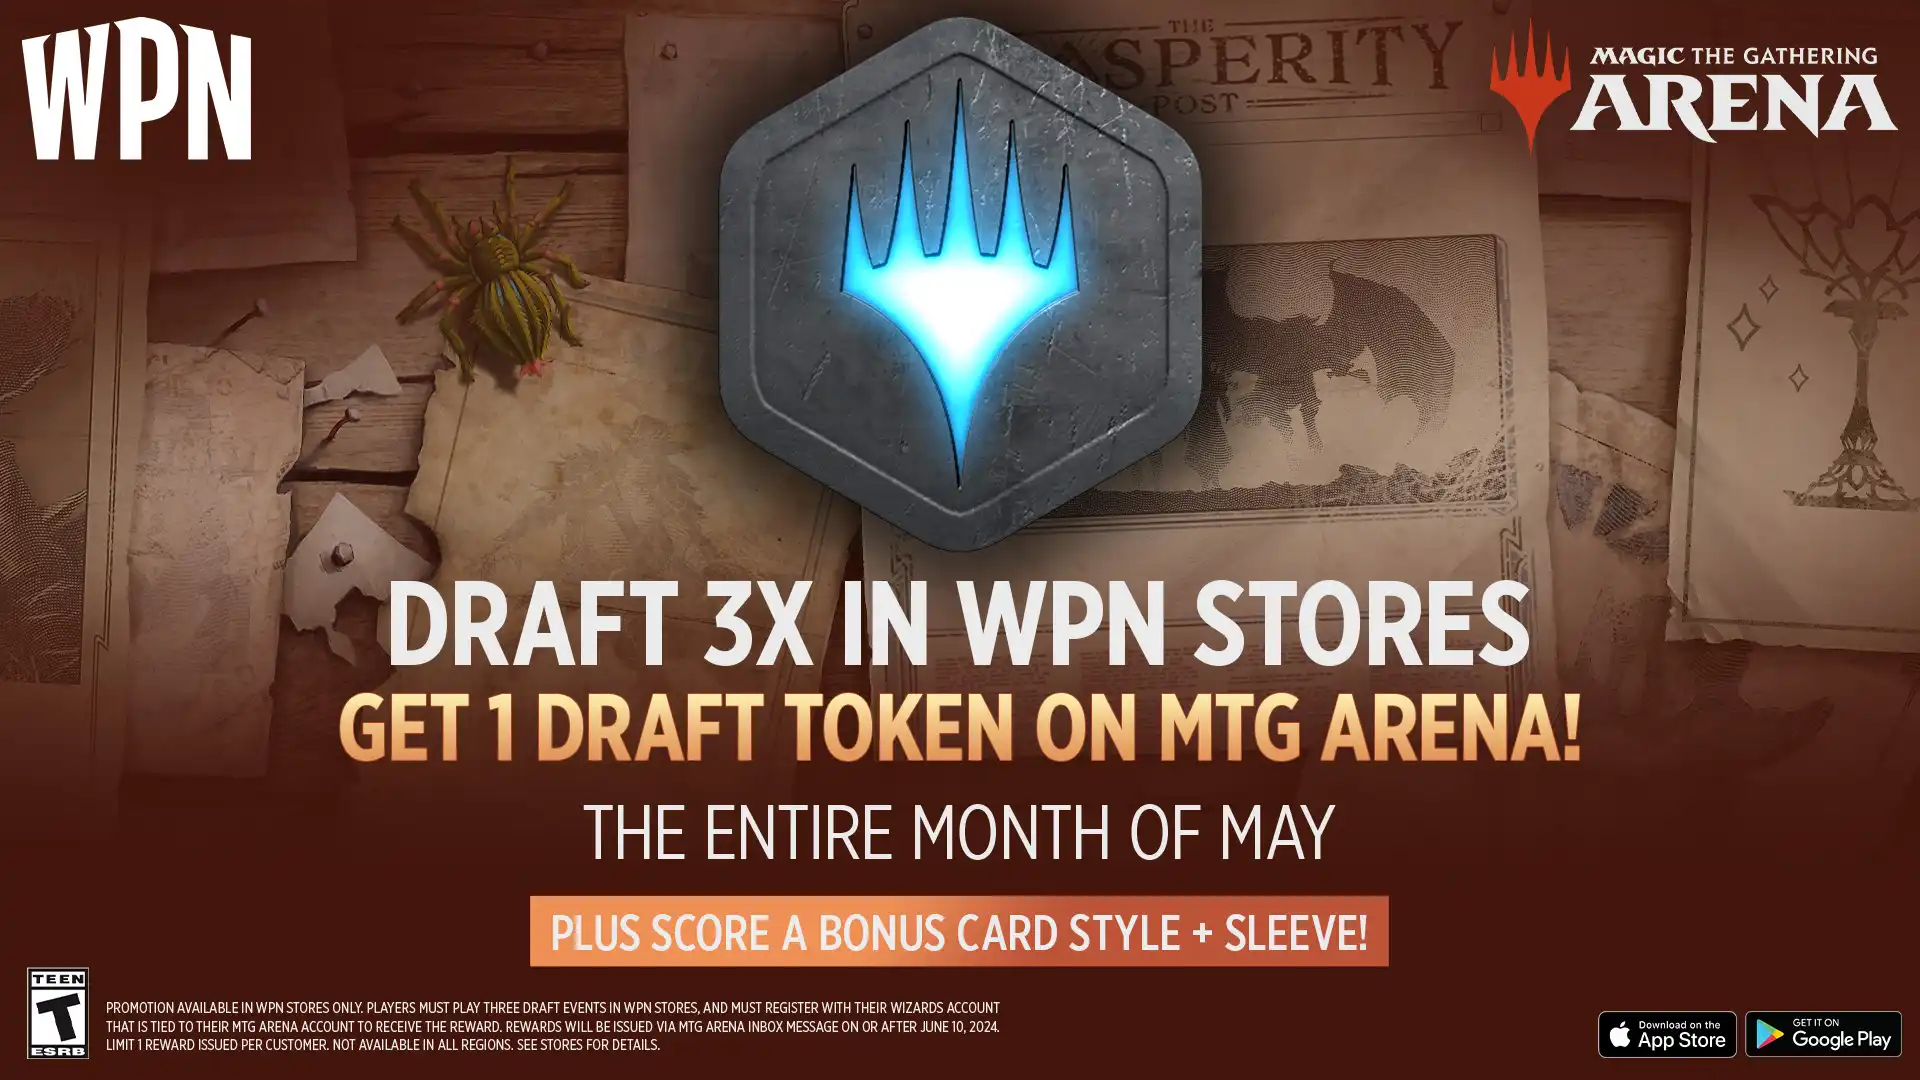 Draft 3x in WPN Stores, get 1 Draft token on MTG Arena the entire month of May, plus score a bonus card style + sleeve